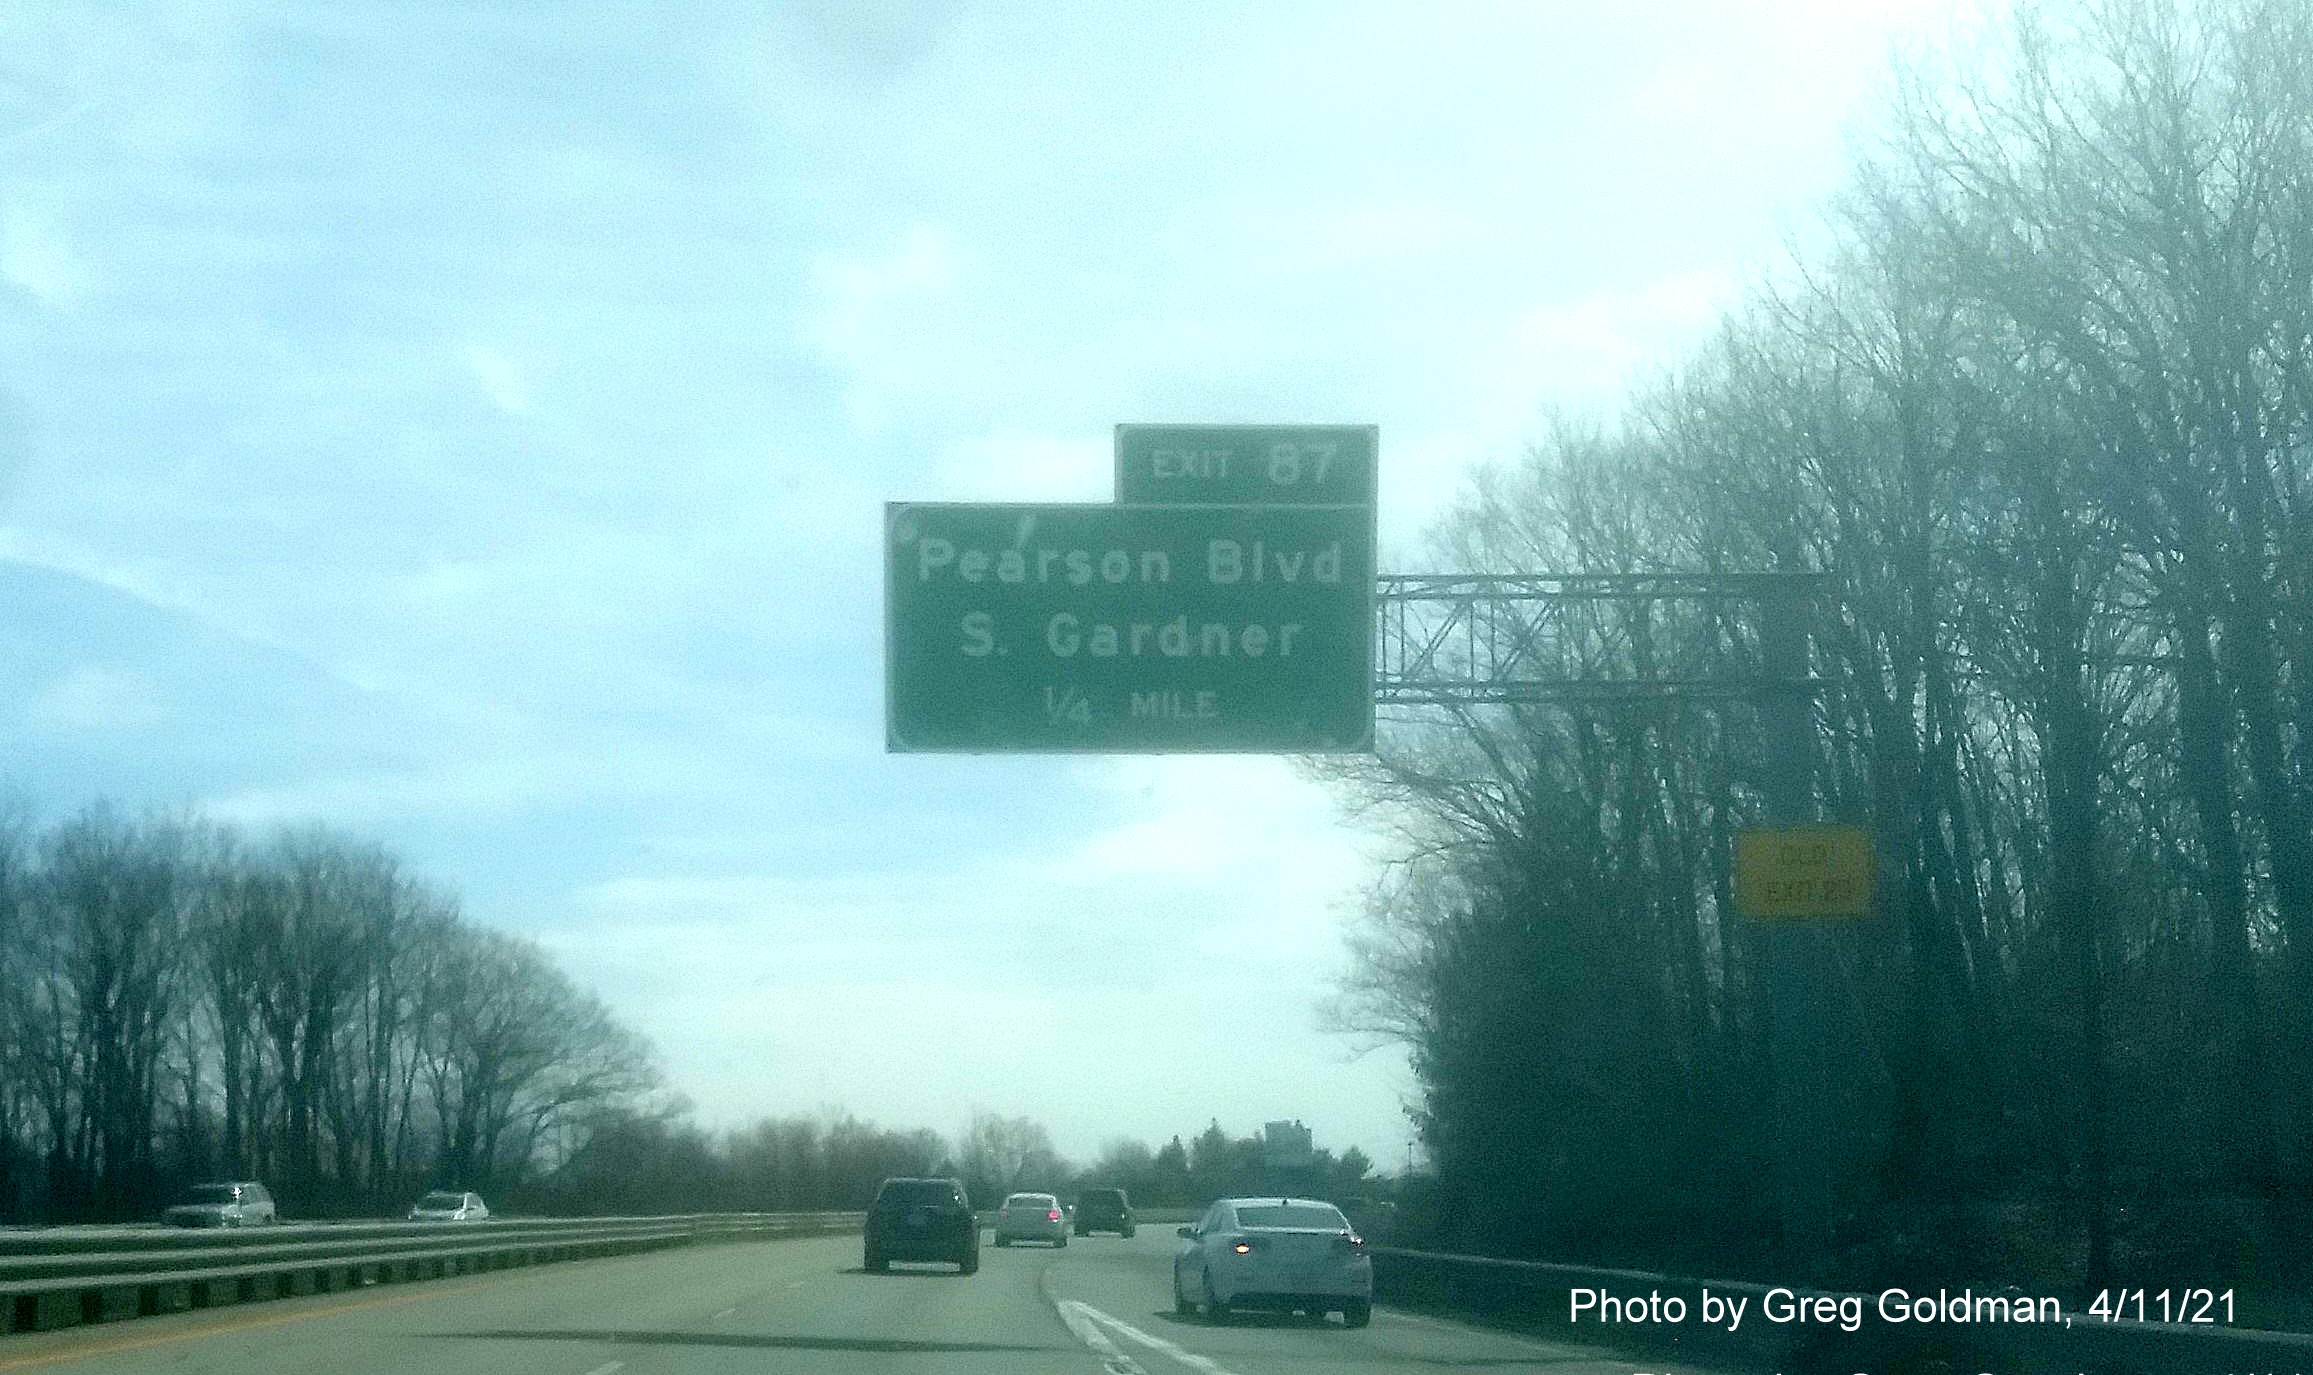 Image of 1/2 mile advance overhead sign for Pearson Blvd with new milepost based exit number and yellow Old Exit 23 advisory sign on support on MA 2 East in Gardner, by Greg Goldman, April 2021